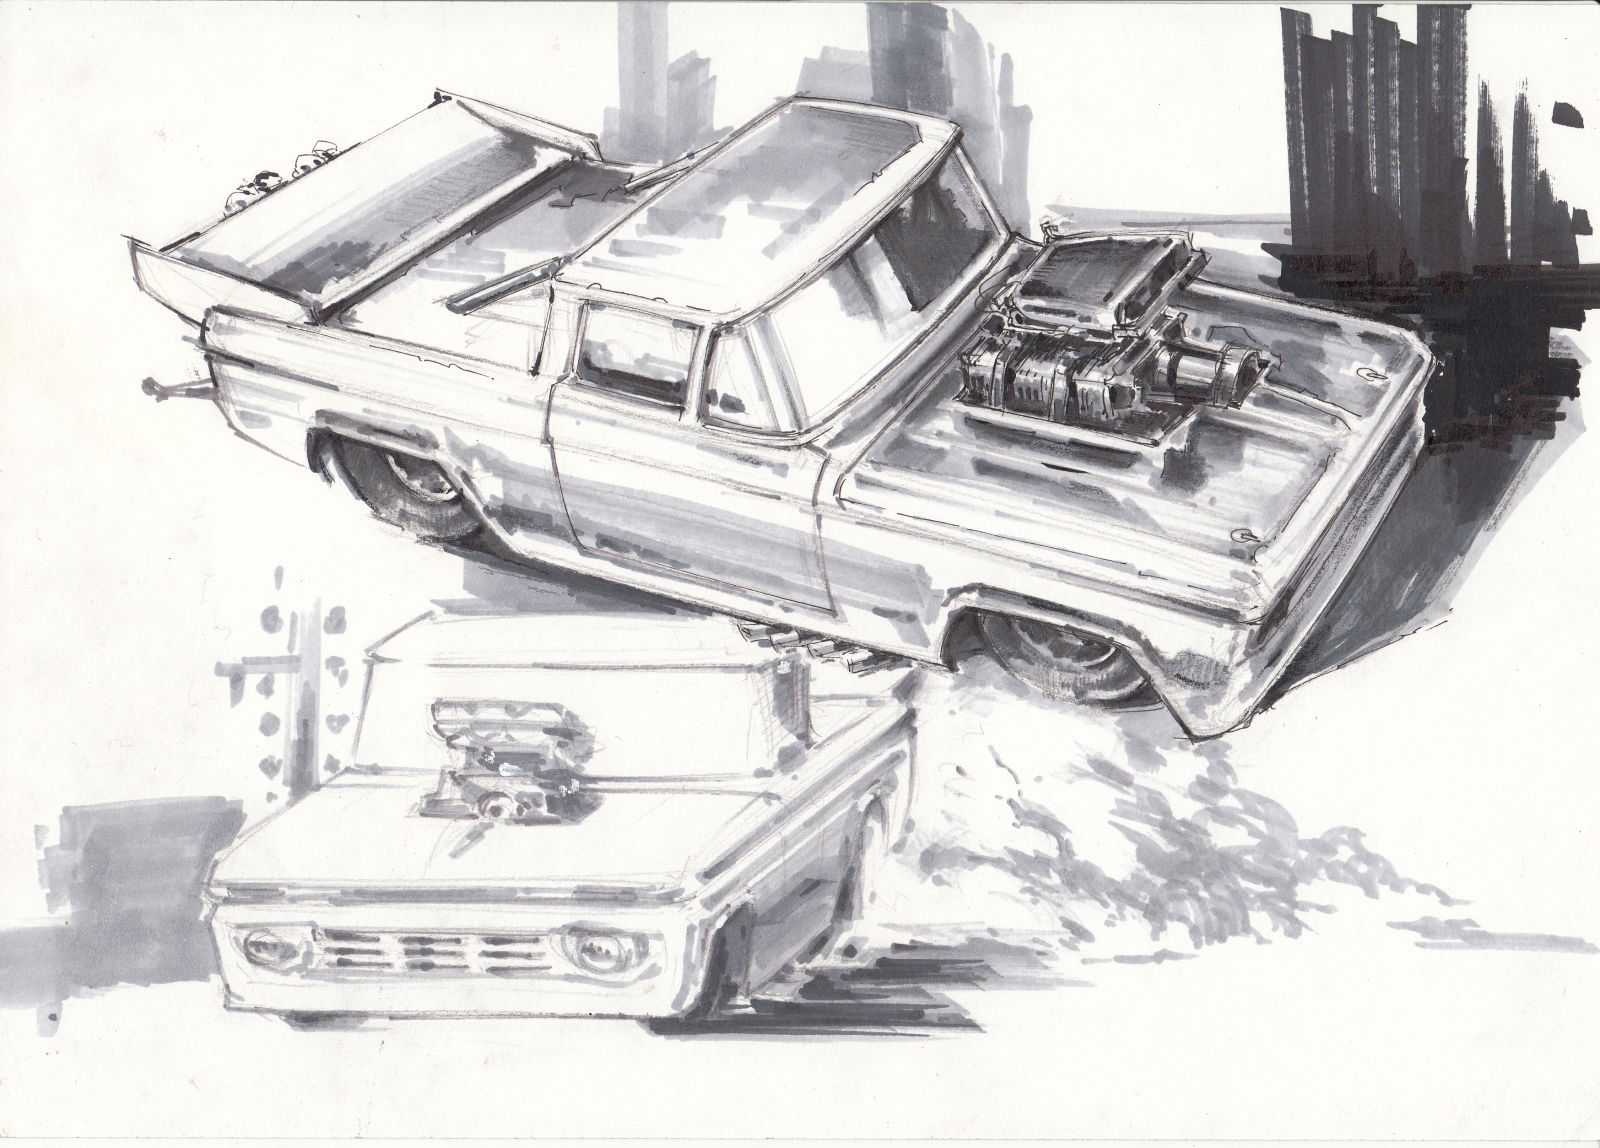 Illustration for article titled The Chevy Wrecker That Started It All